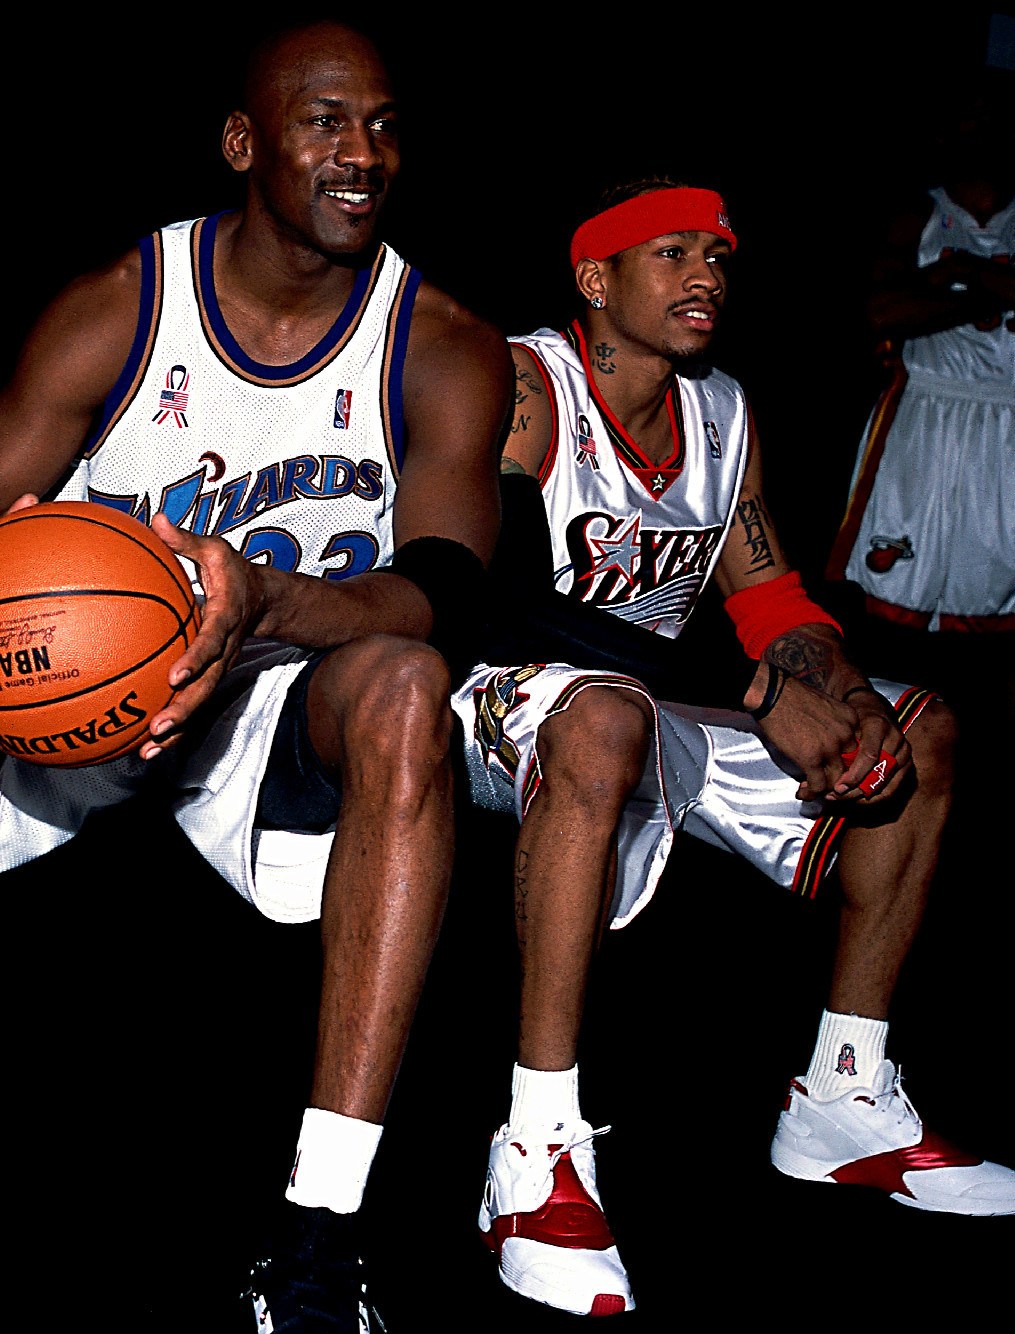 iverson answer 5 release